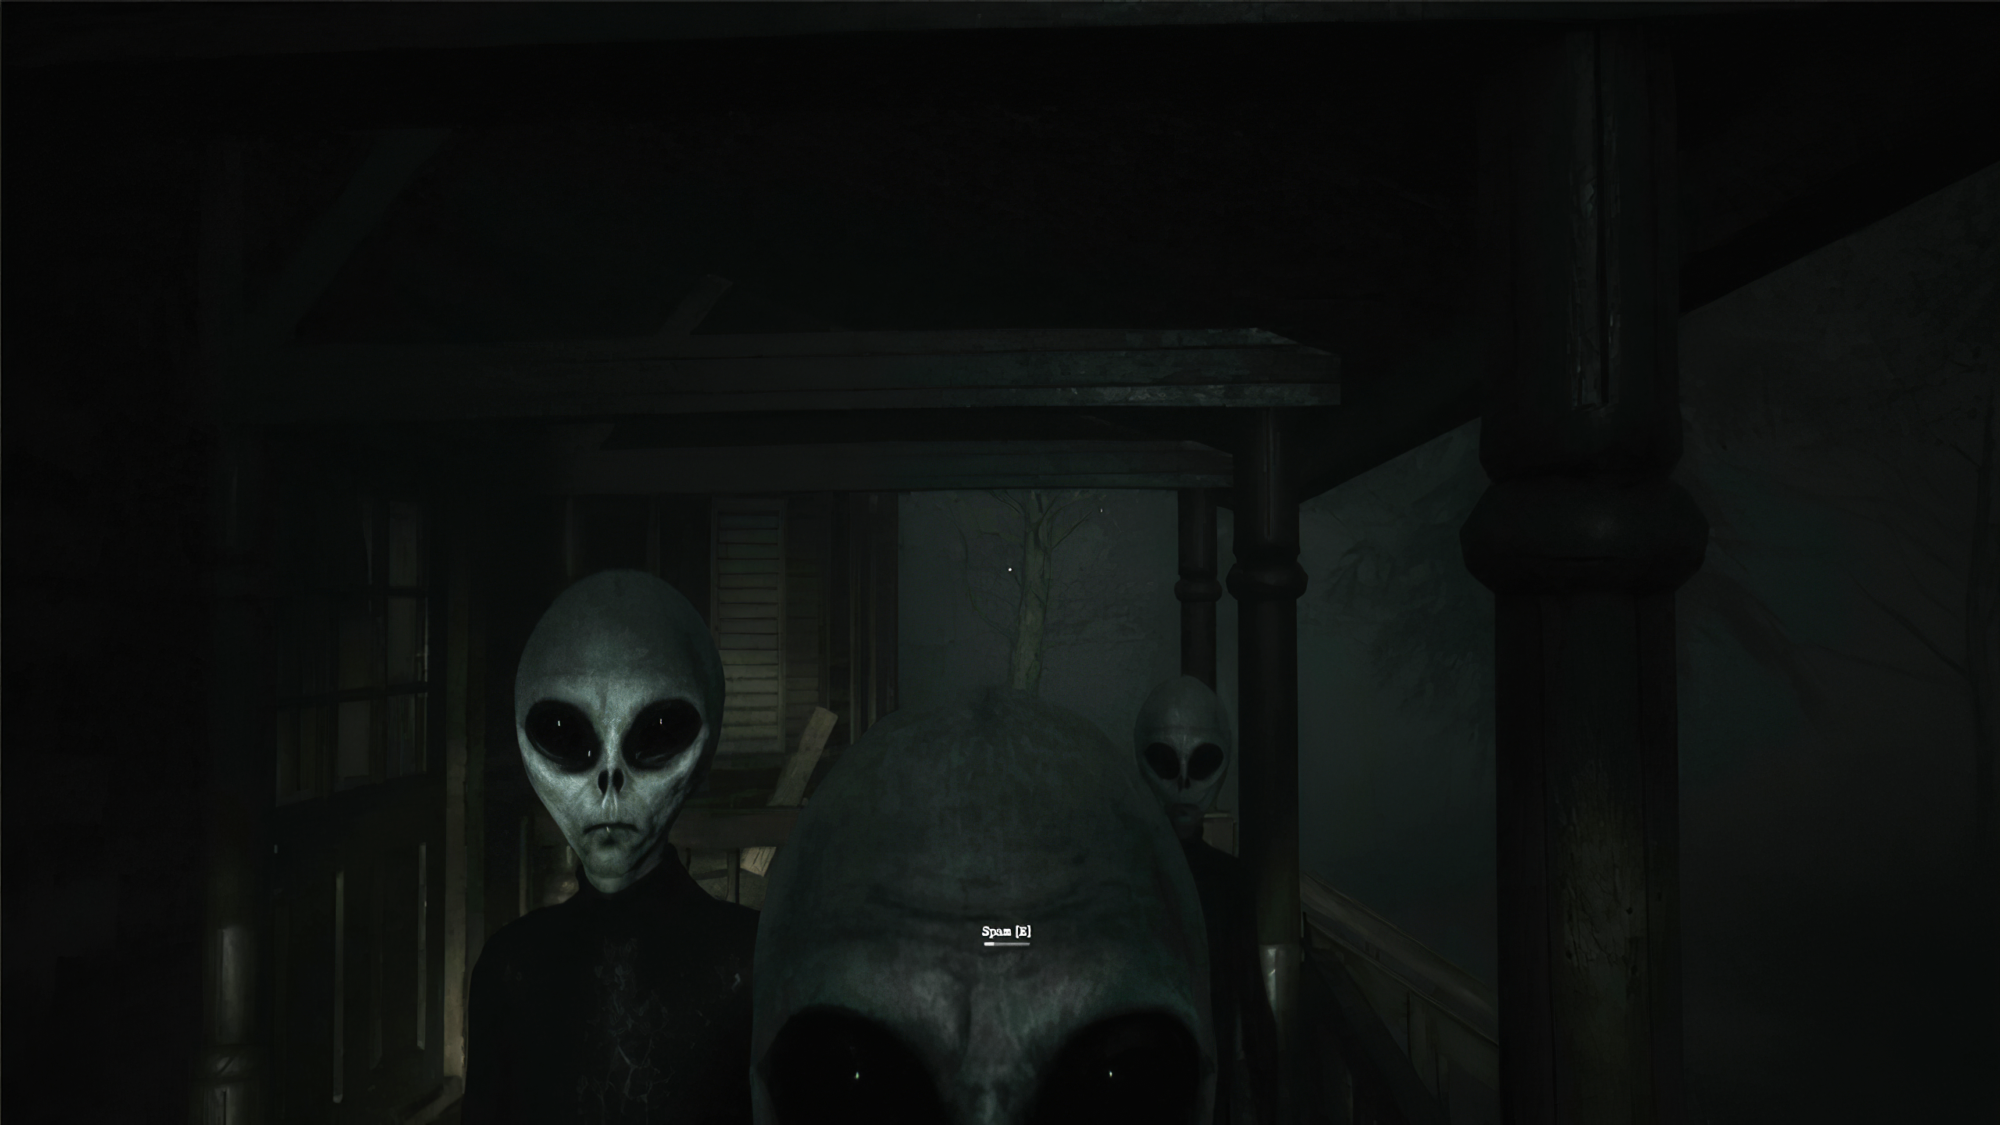 Eyes is the latest Slender-esque horror game I'm too terrified to play